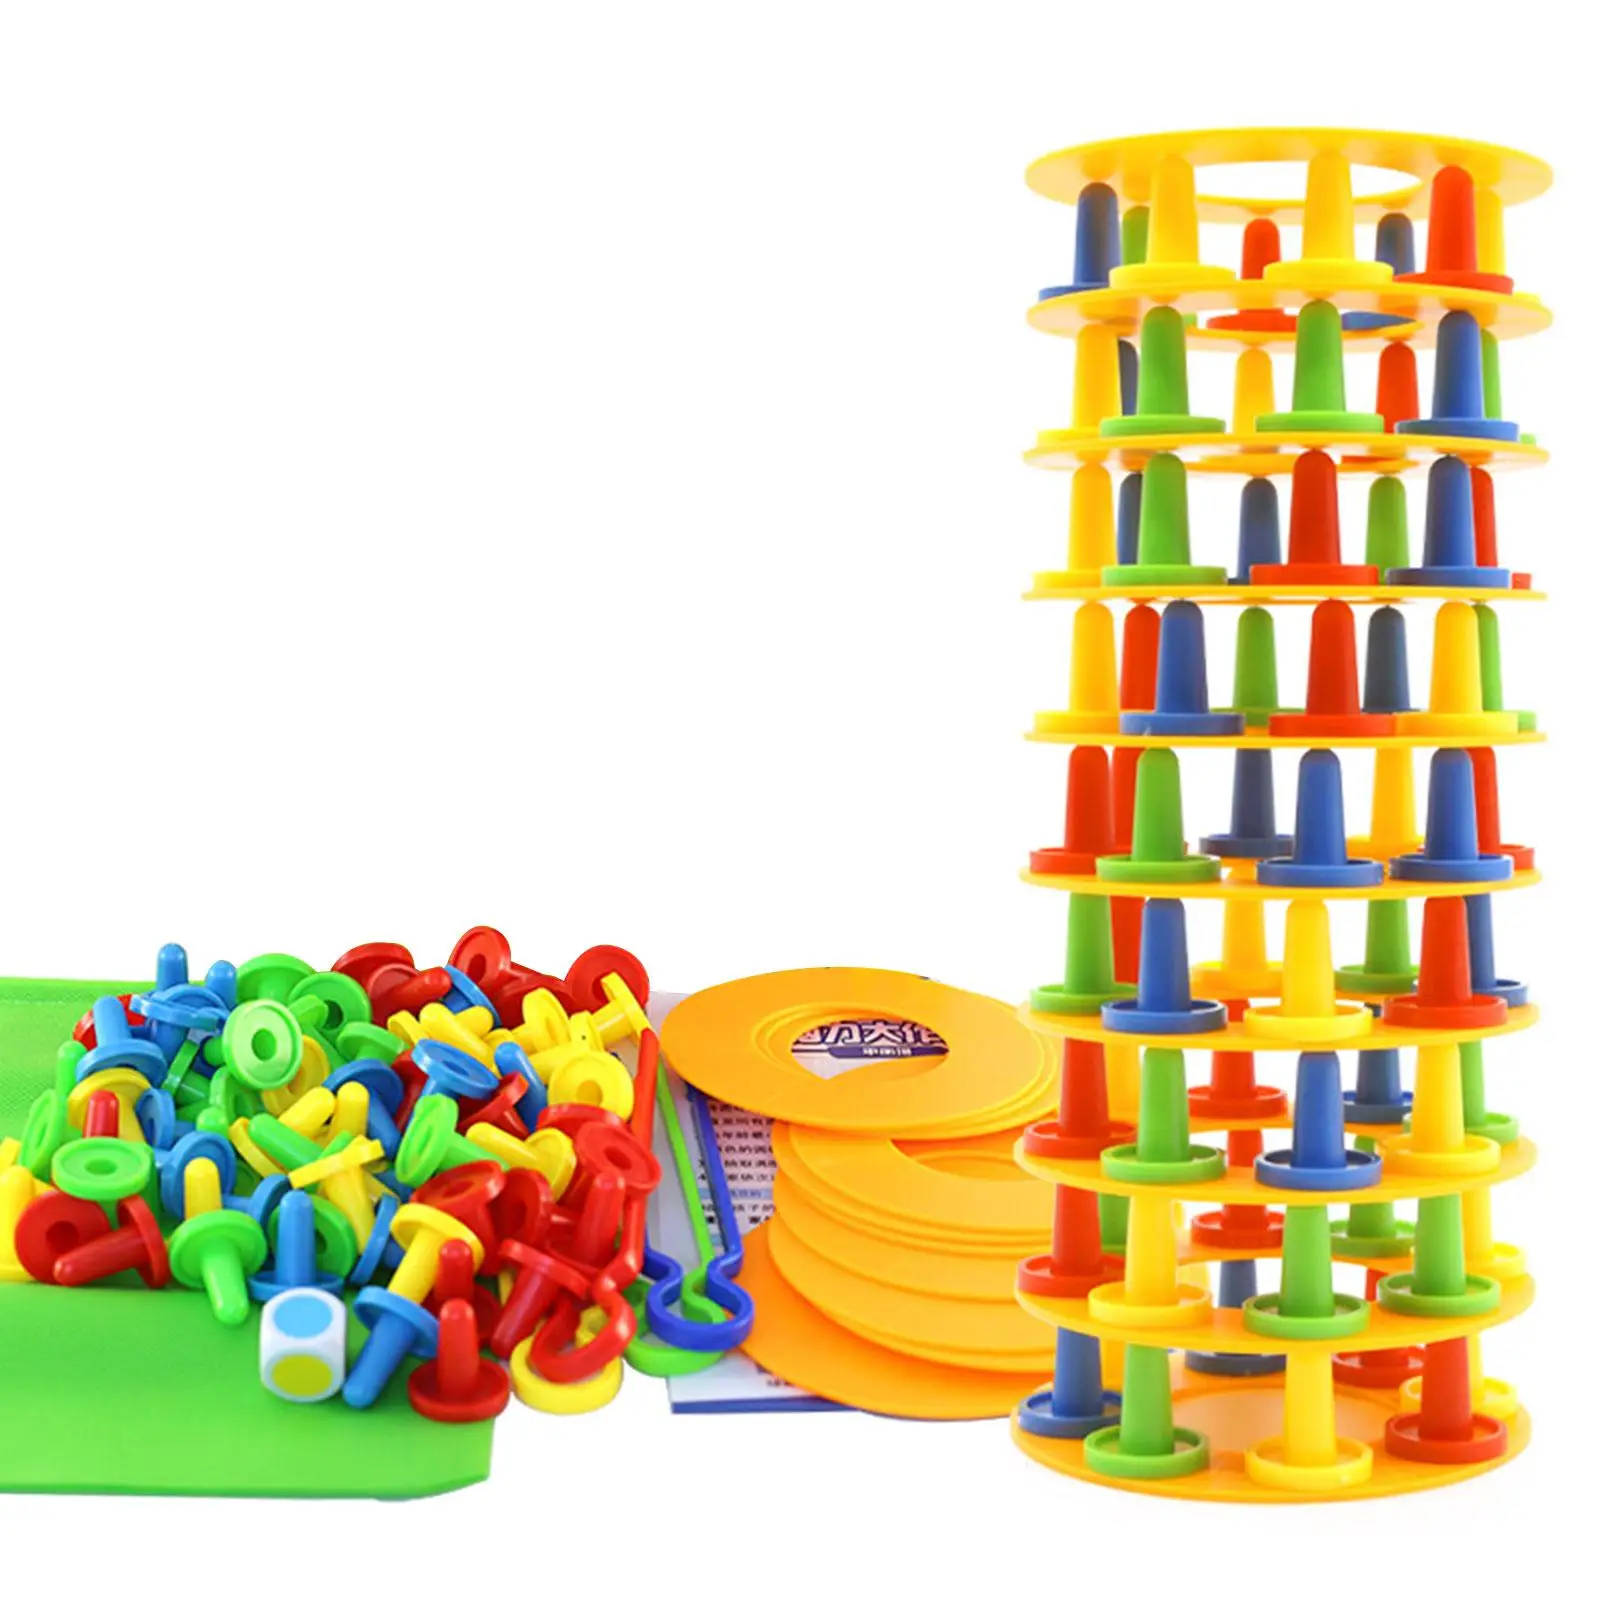 Balance Blocks Stacking Game Set Early Learning Fine Motor Skills Tumble Towers Game for Activities Home Travel Family Preschool